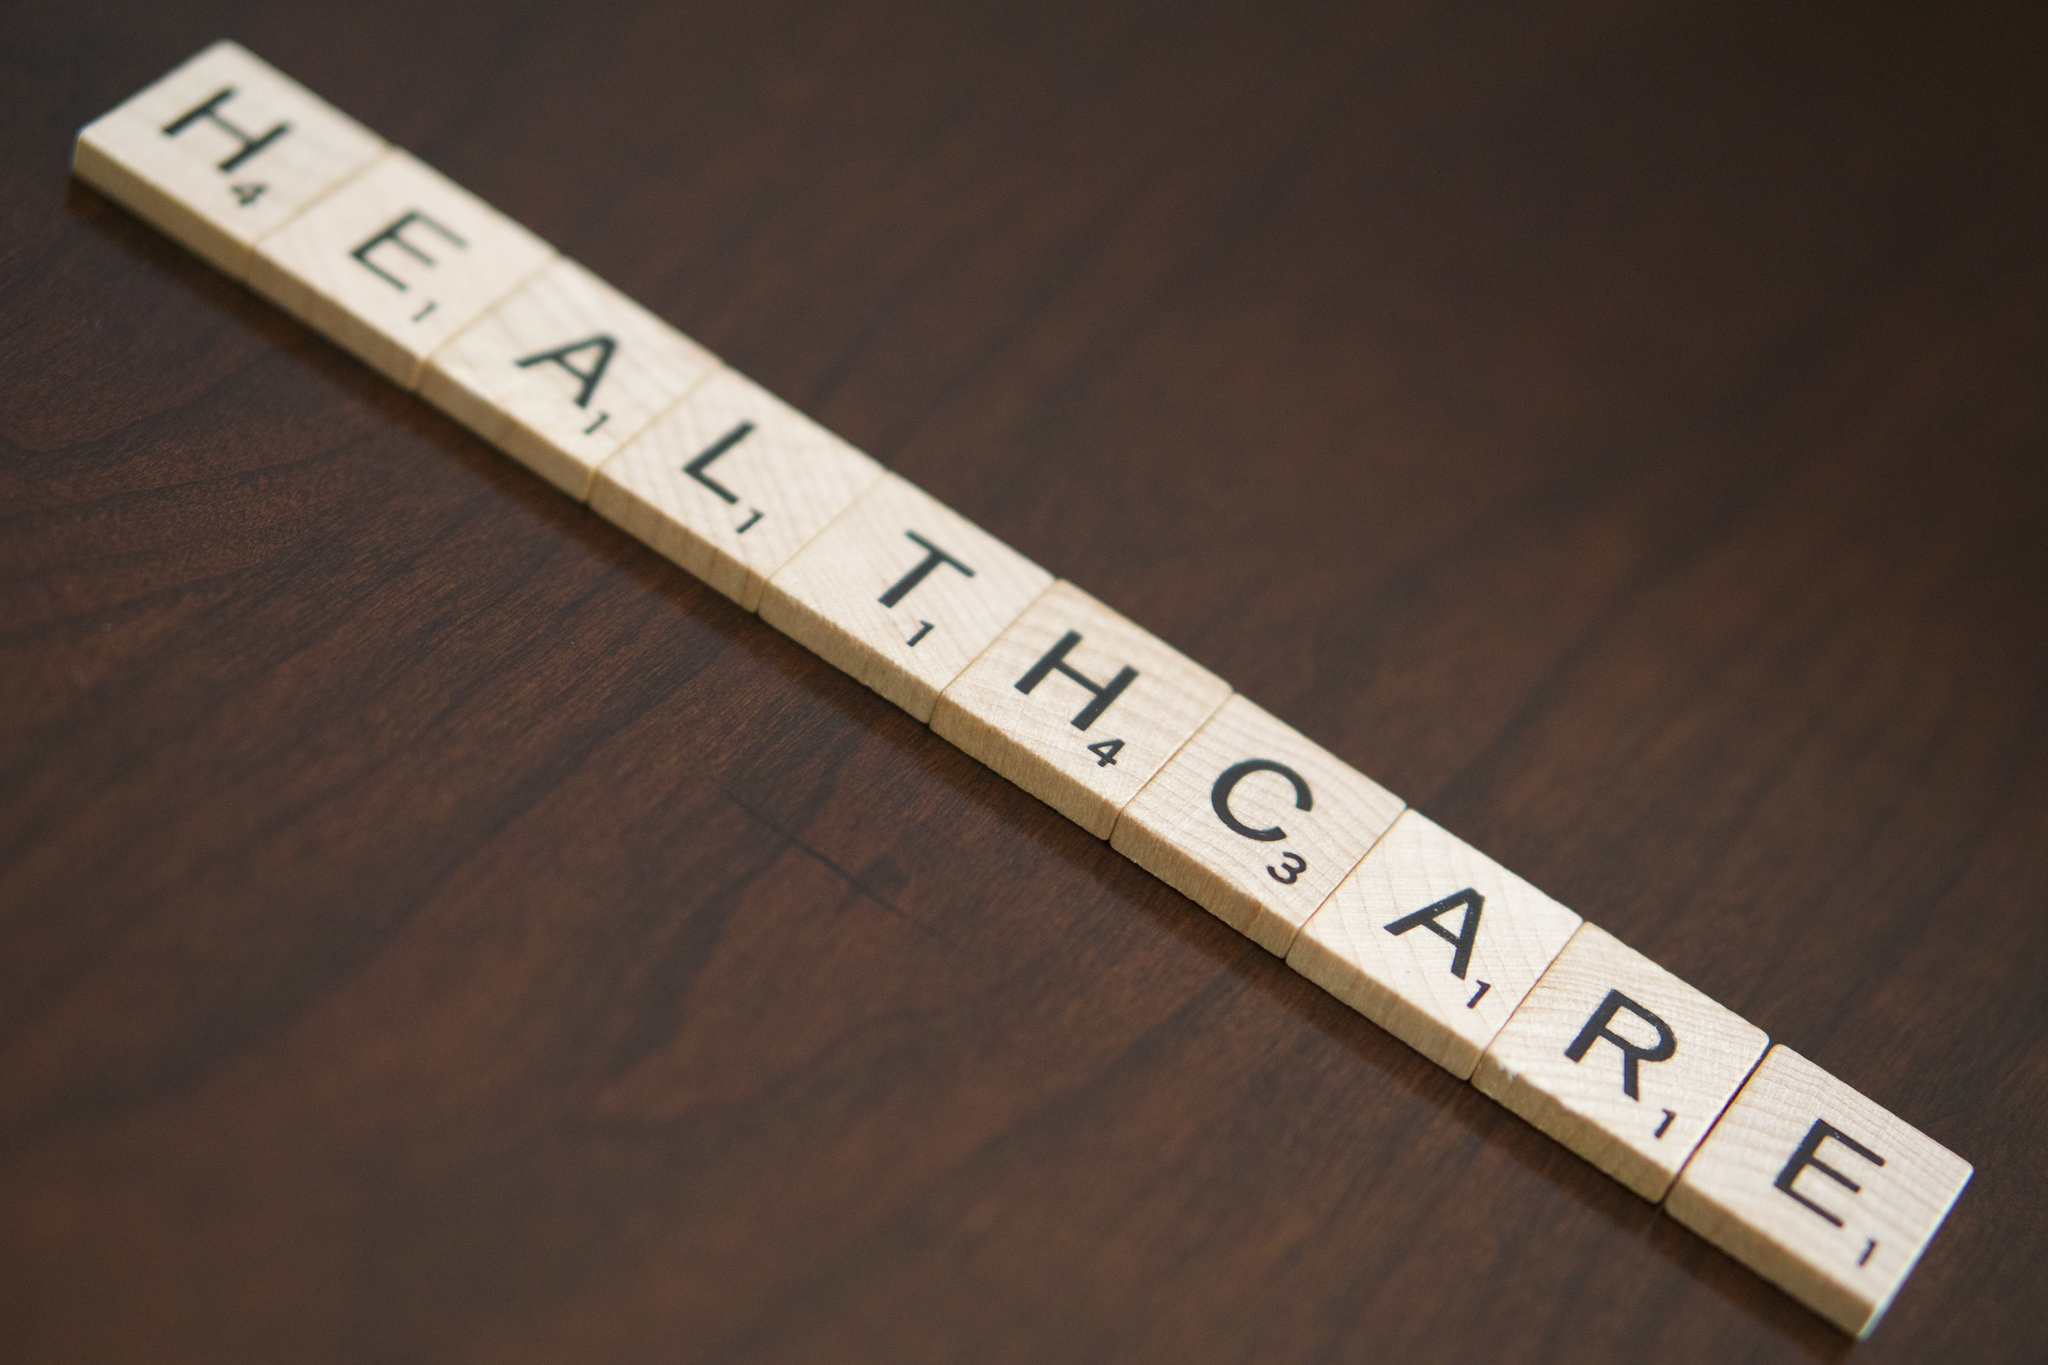 Scrabble letters spelling "Healthcare," published as part of "Creating a Healthy Buzz: Why You Should Use Social Media in Healthcare"